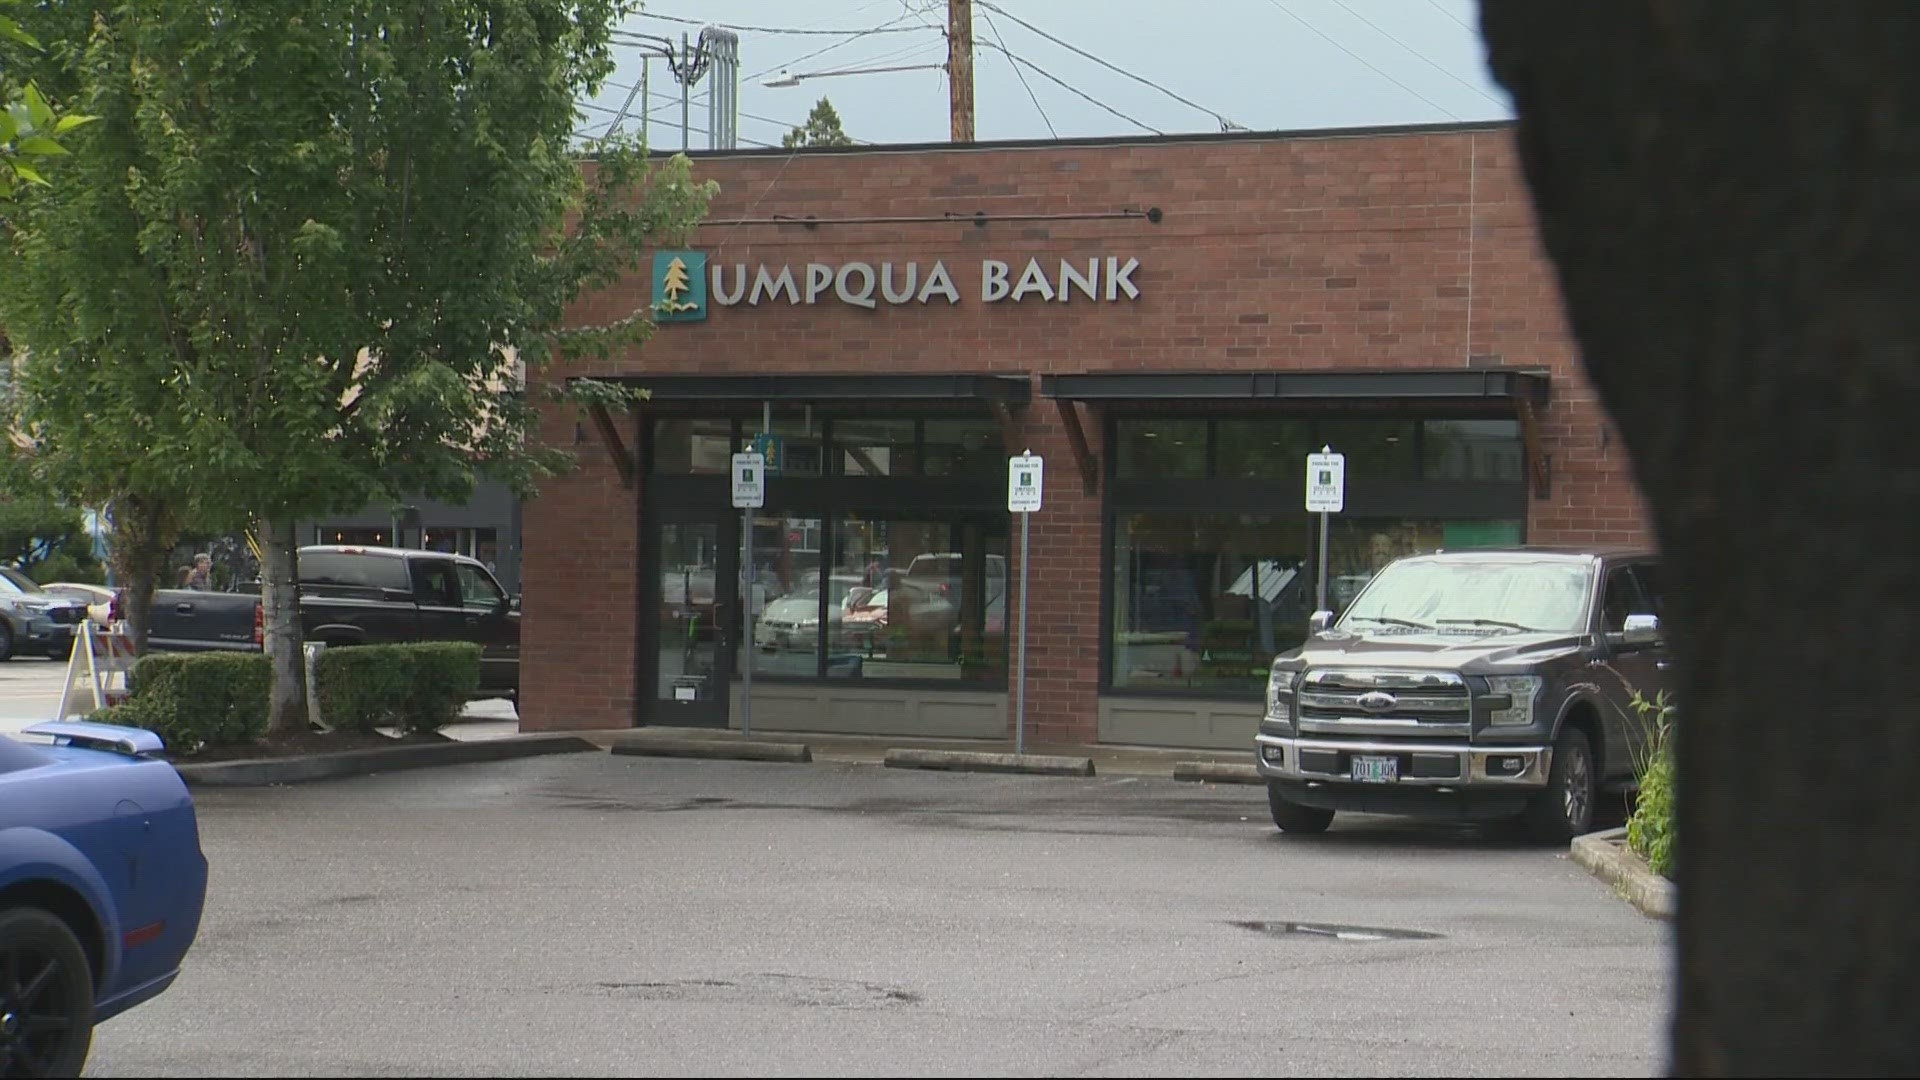 Portland-based Umpqua Bank, which recently merged with Columbia Bank, said it's found no indication that customer data has been compromised.